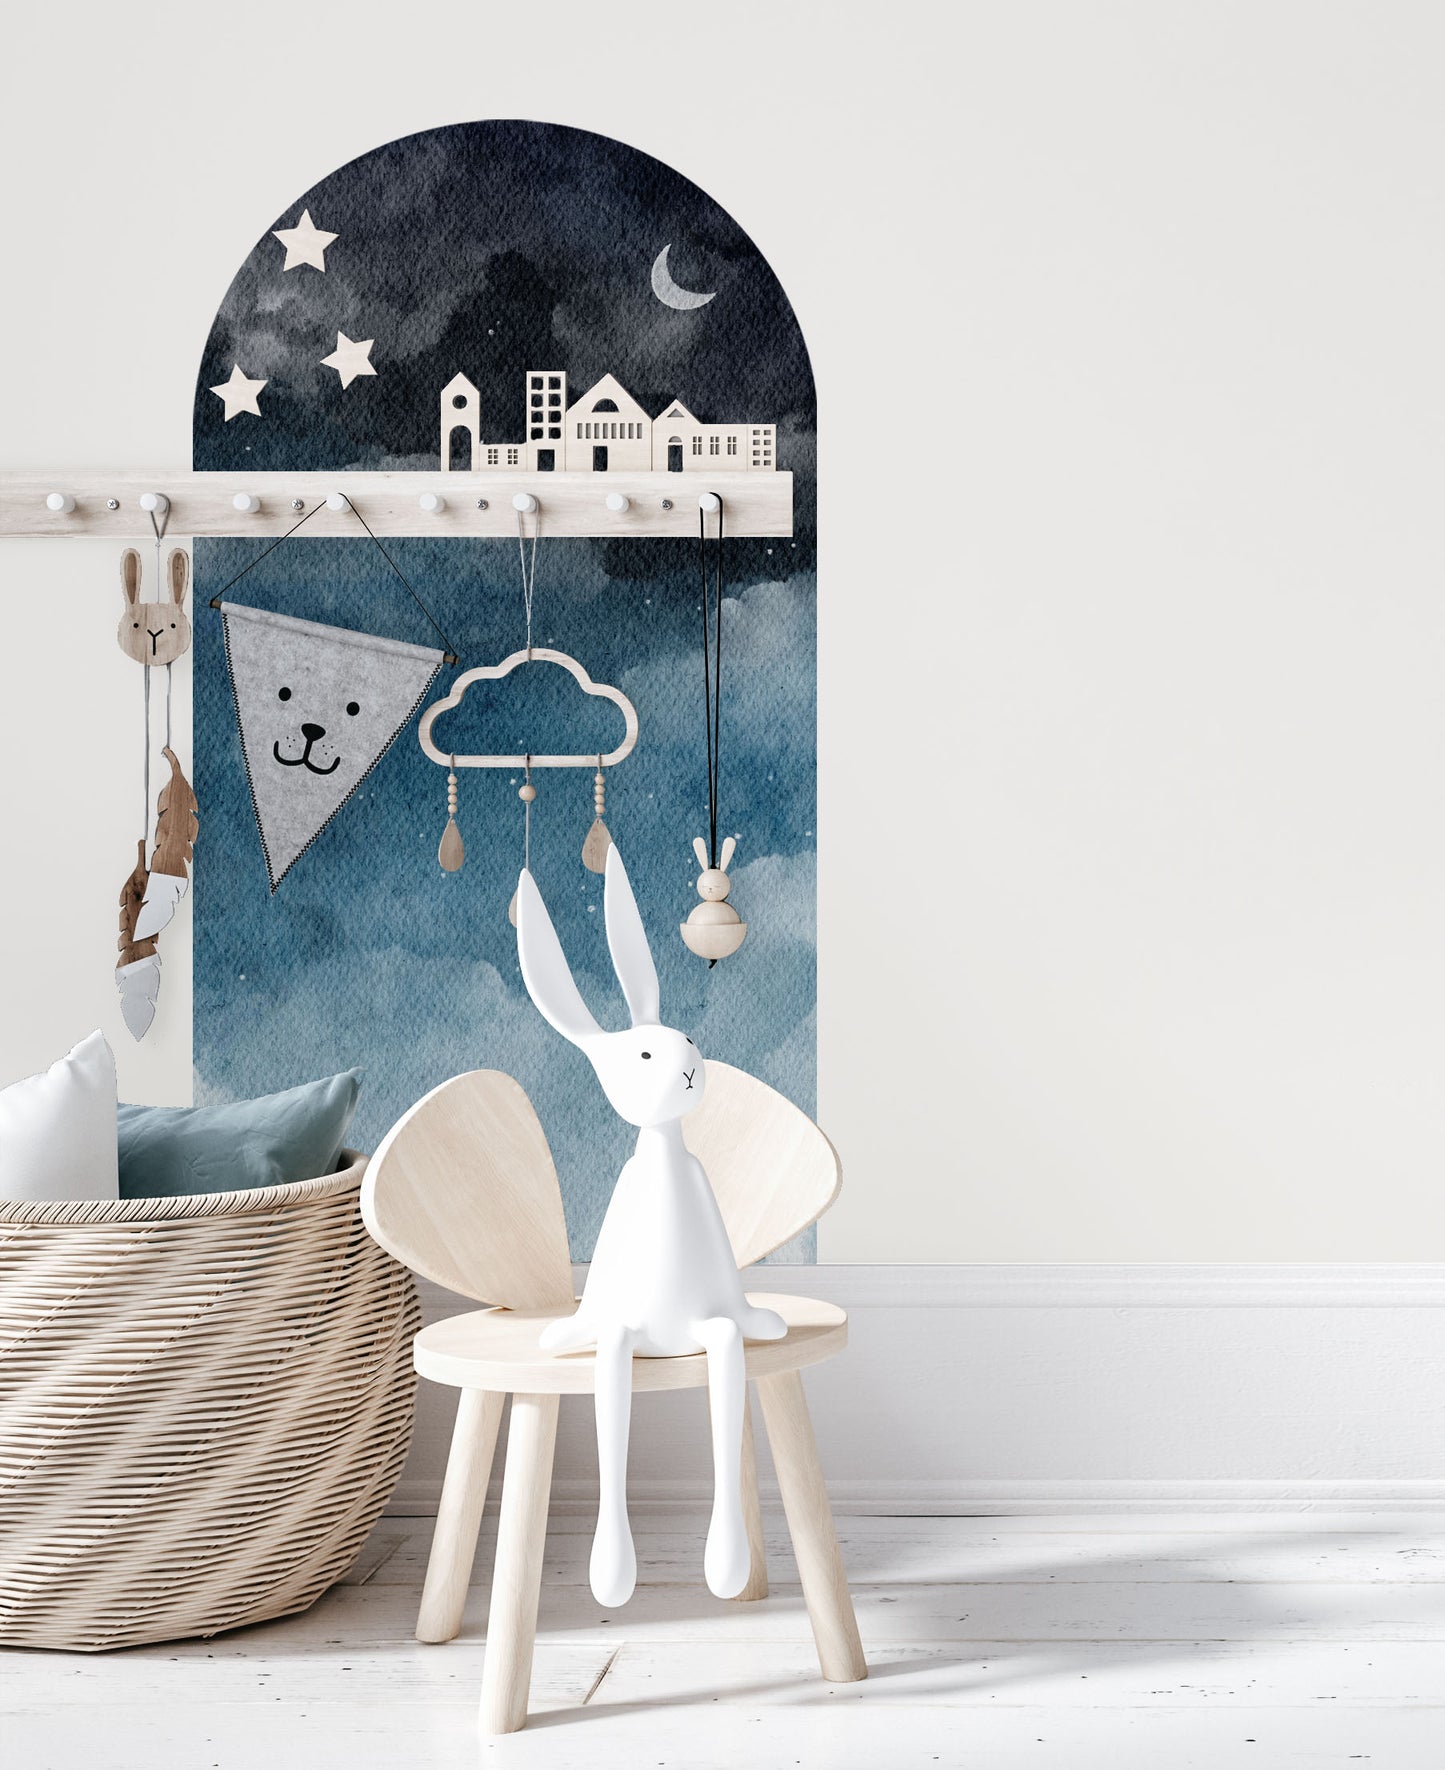 Arch Wall Decal - Twilight - Wall Decals Australia - Fable and Fawn 